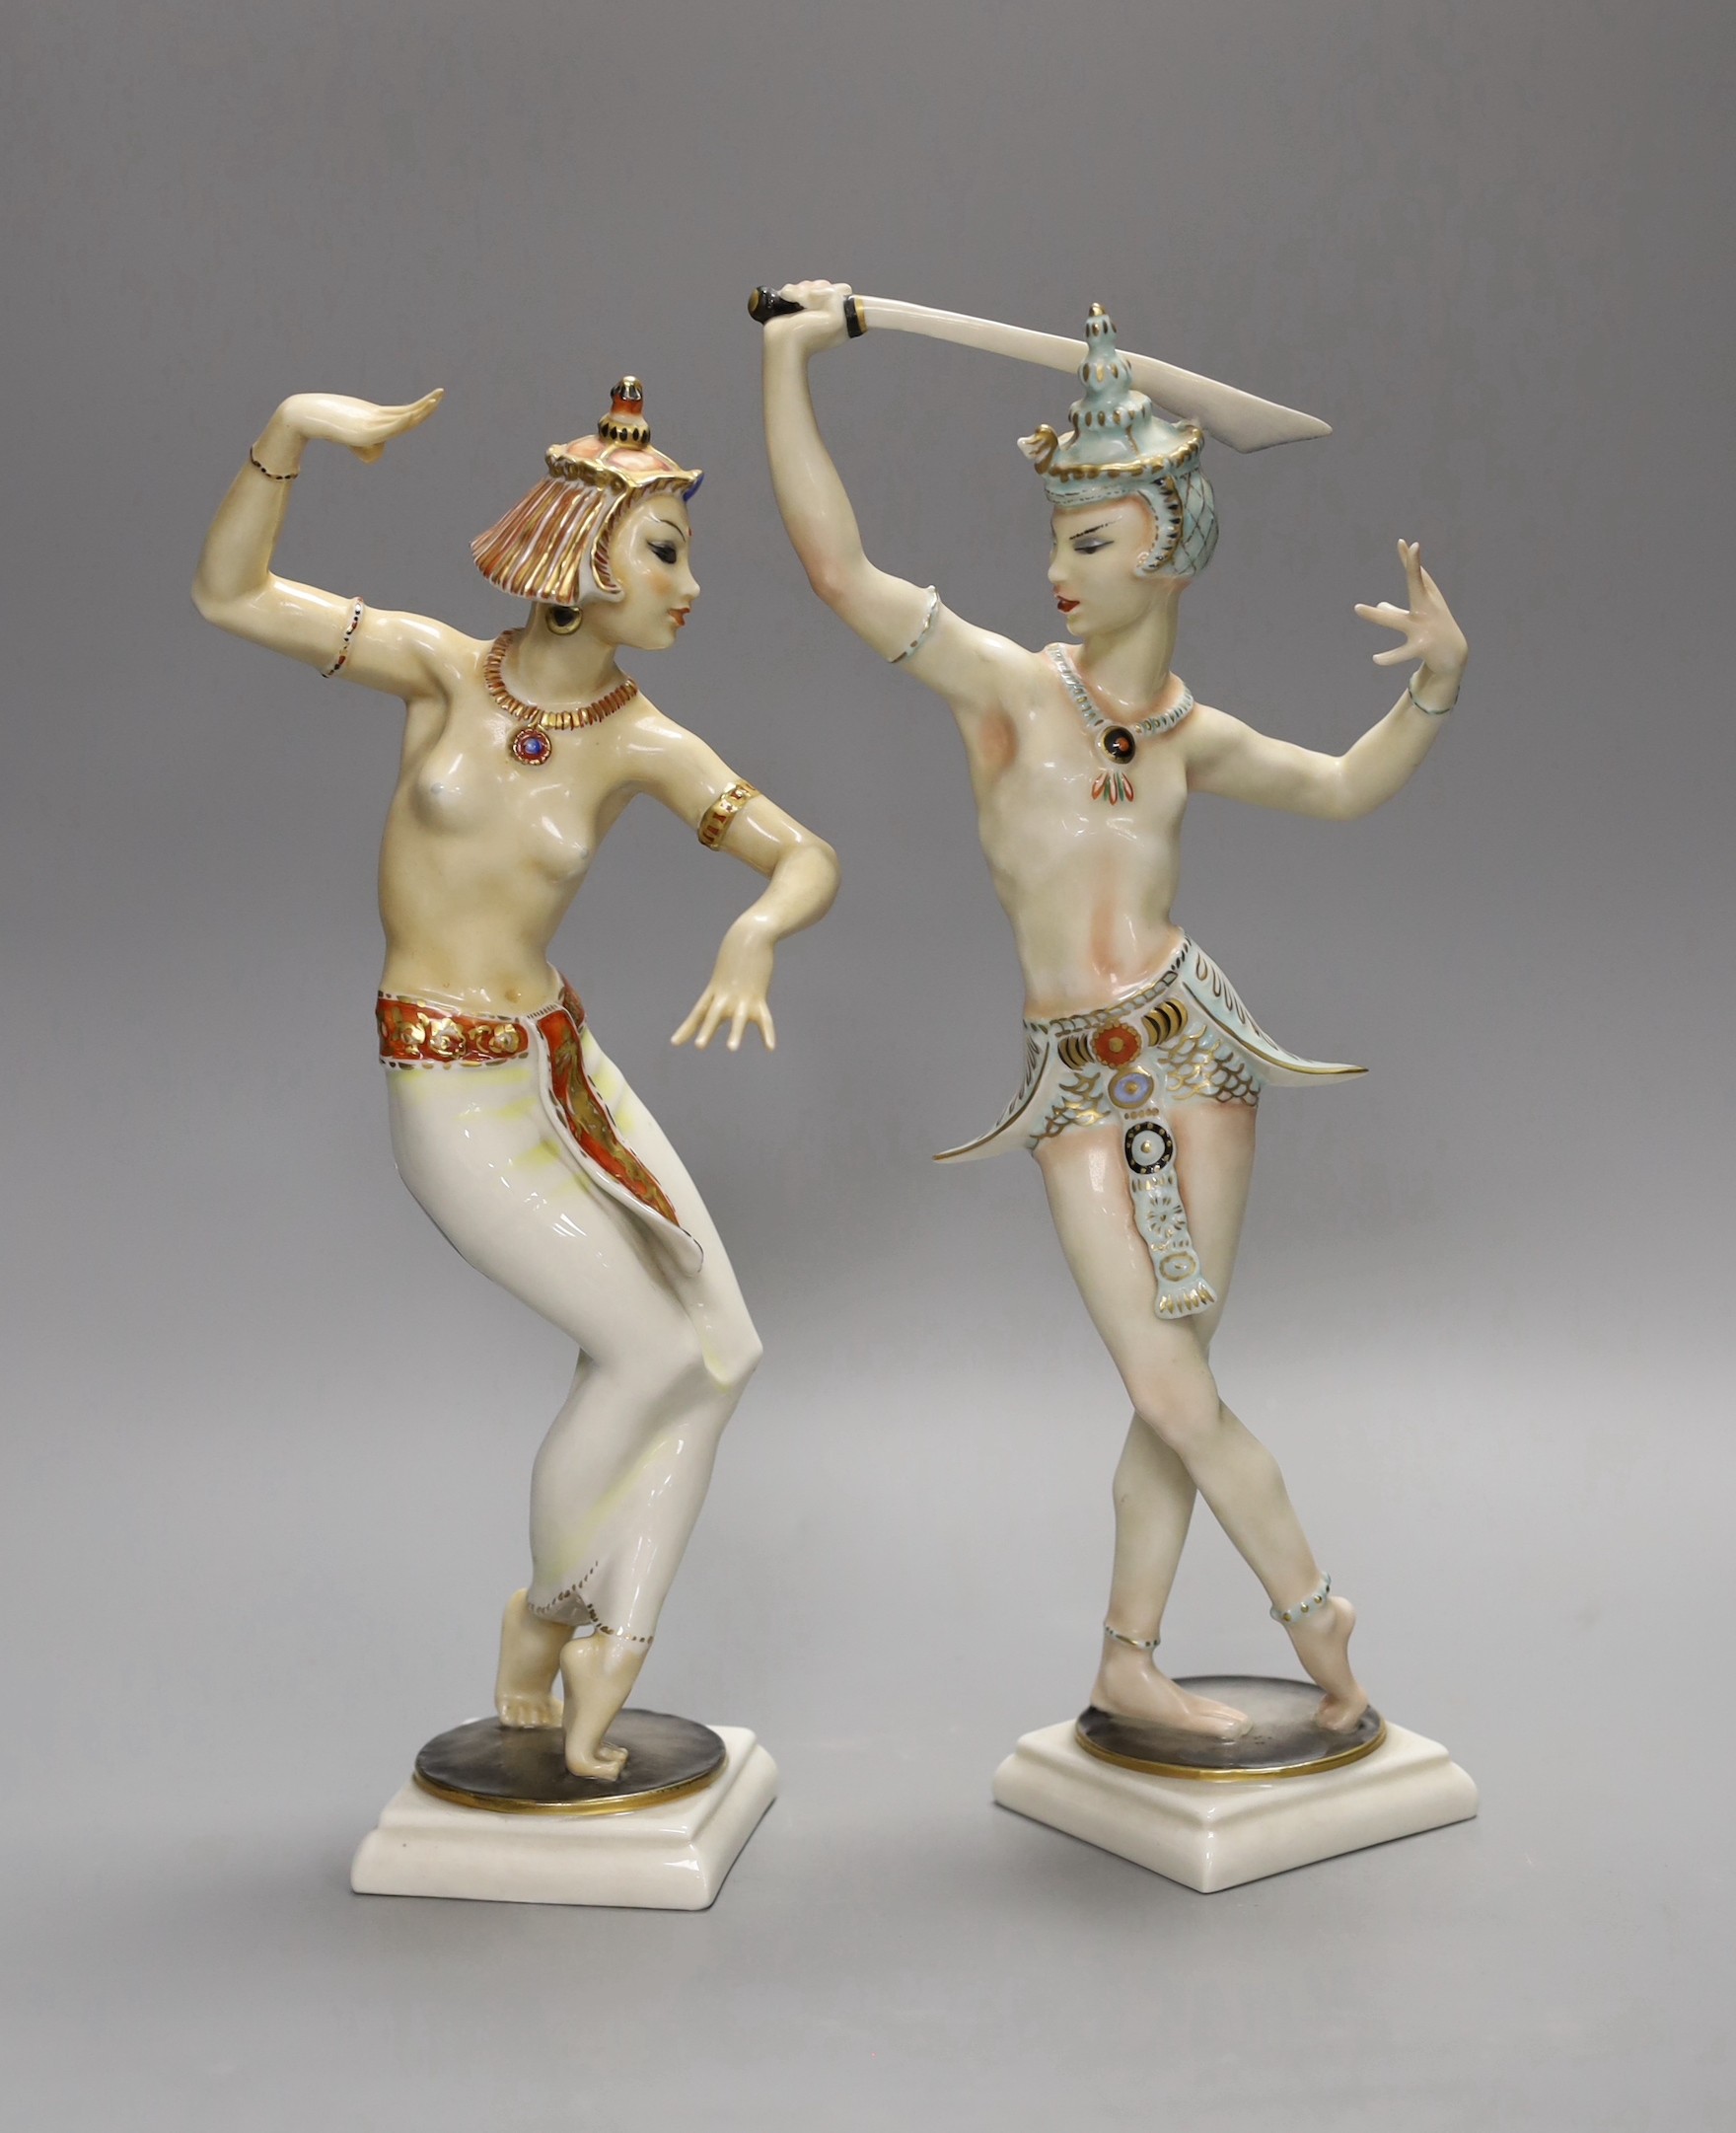 Two Hutschenreuther figures of Siamese dancers, 30cm